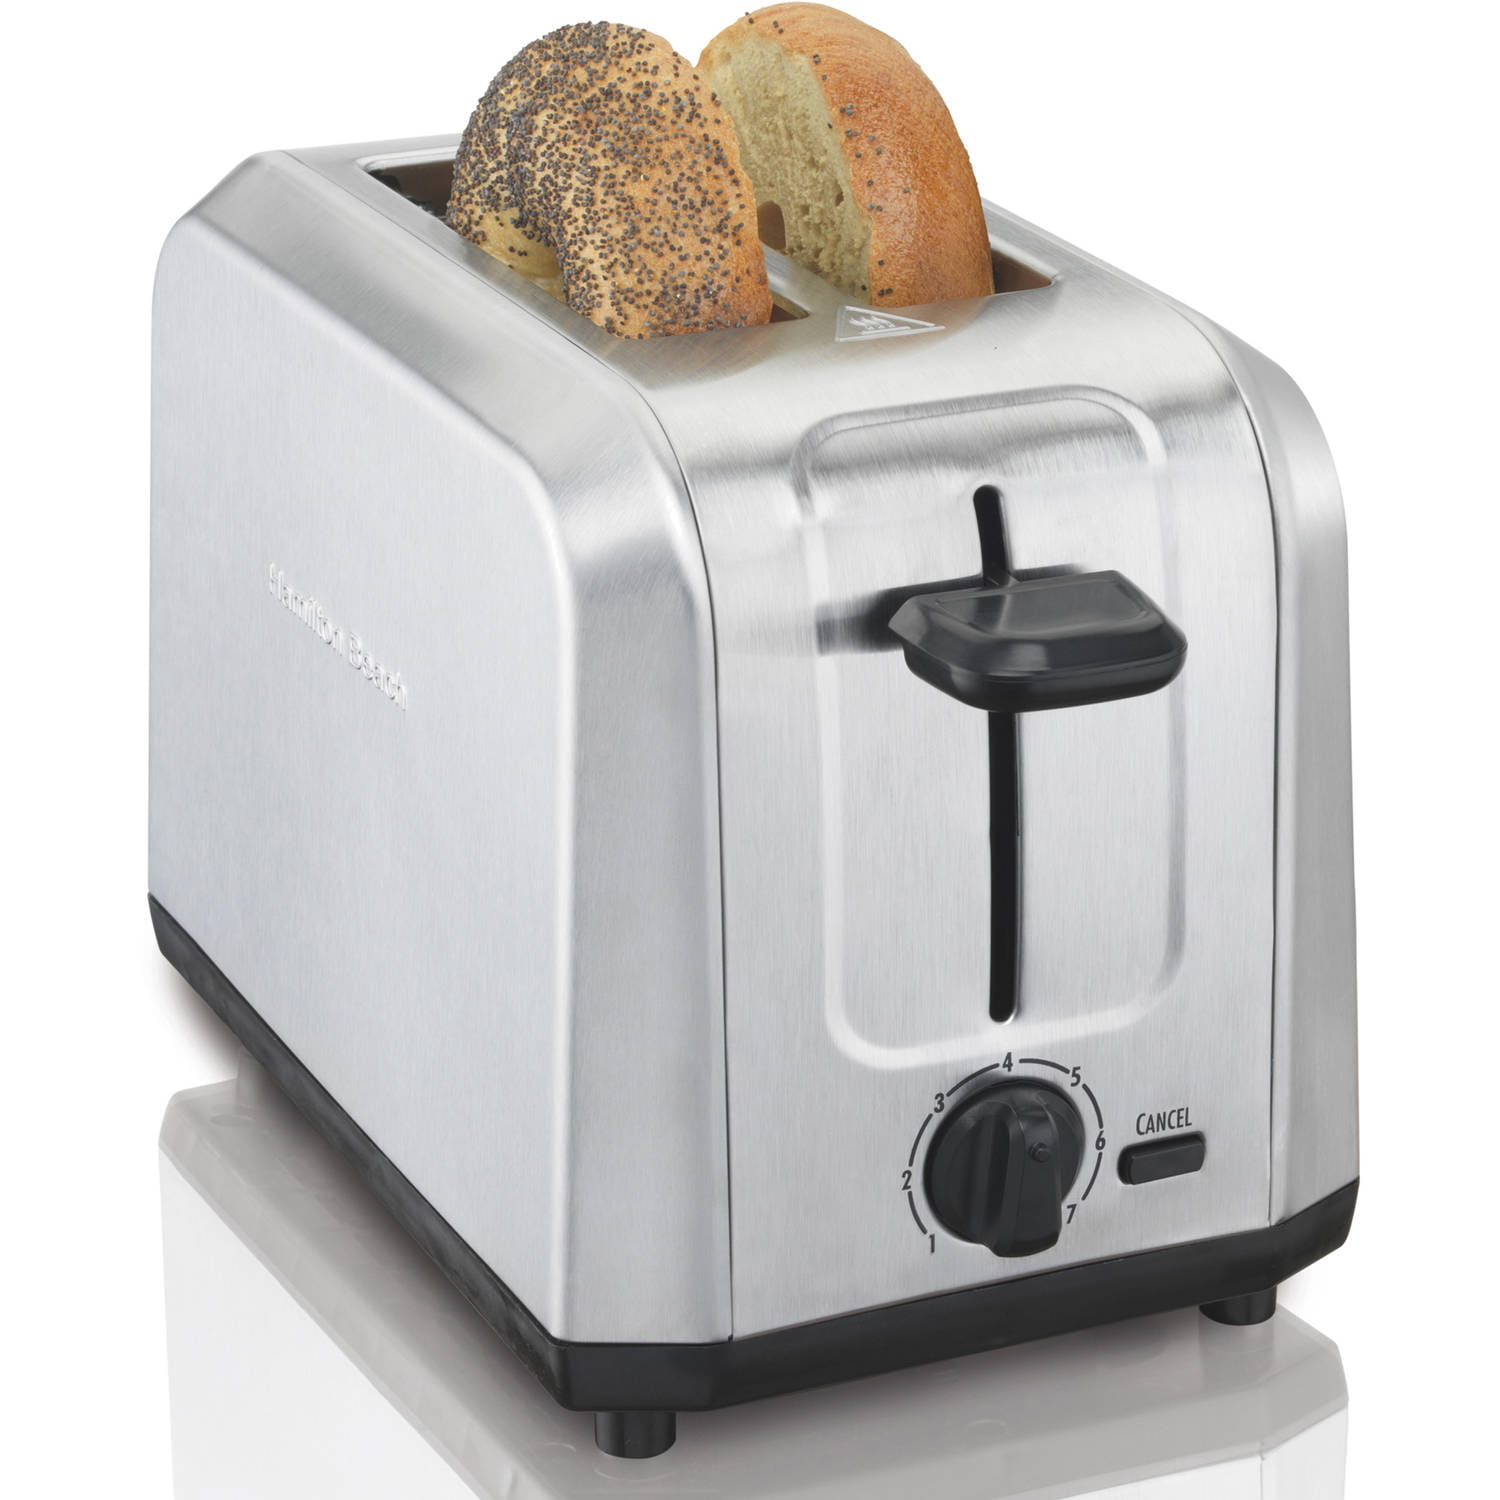 Hamilton Beach Brushed Stainless Steel Toaster Model 22910